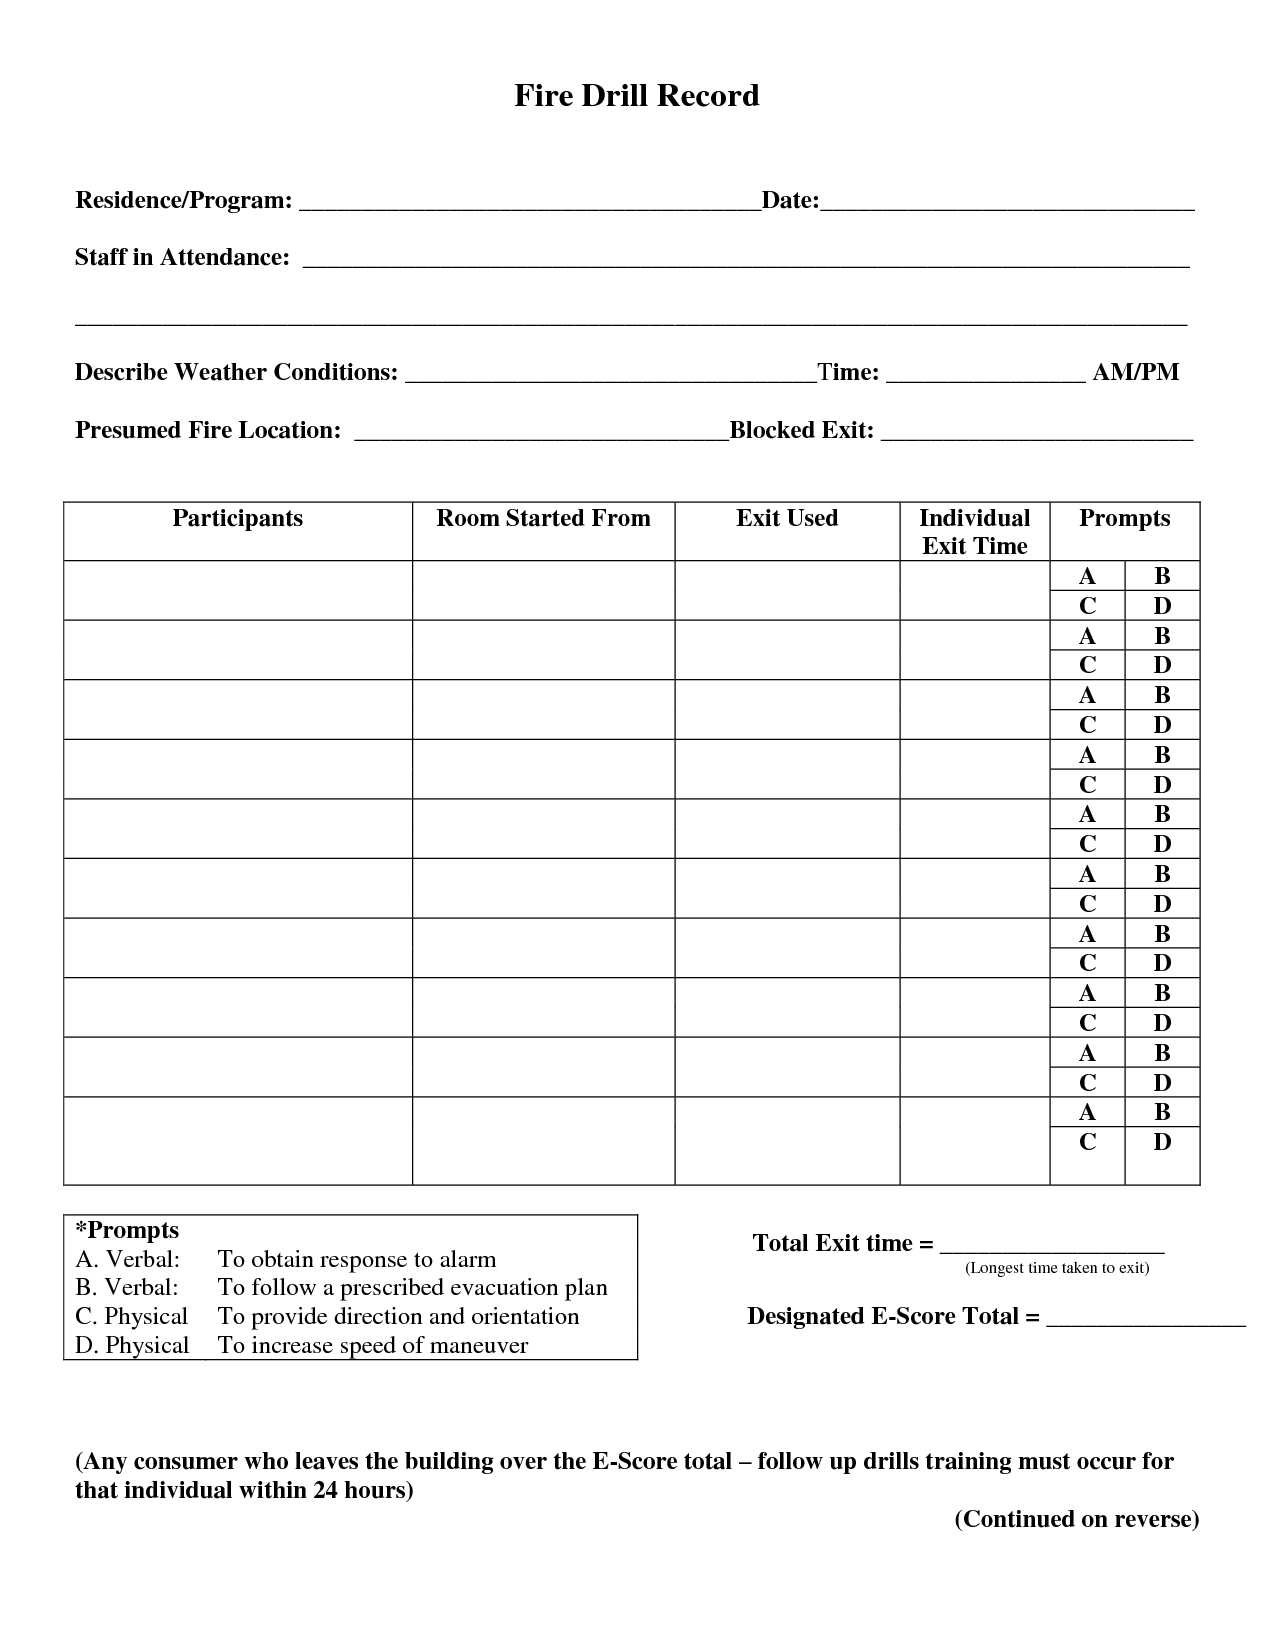 22 Images Of Osha Fire Drill Safety Template | Jackmonster For Fire Evacuation Drill Report Template